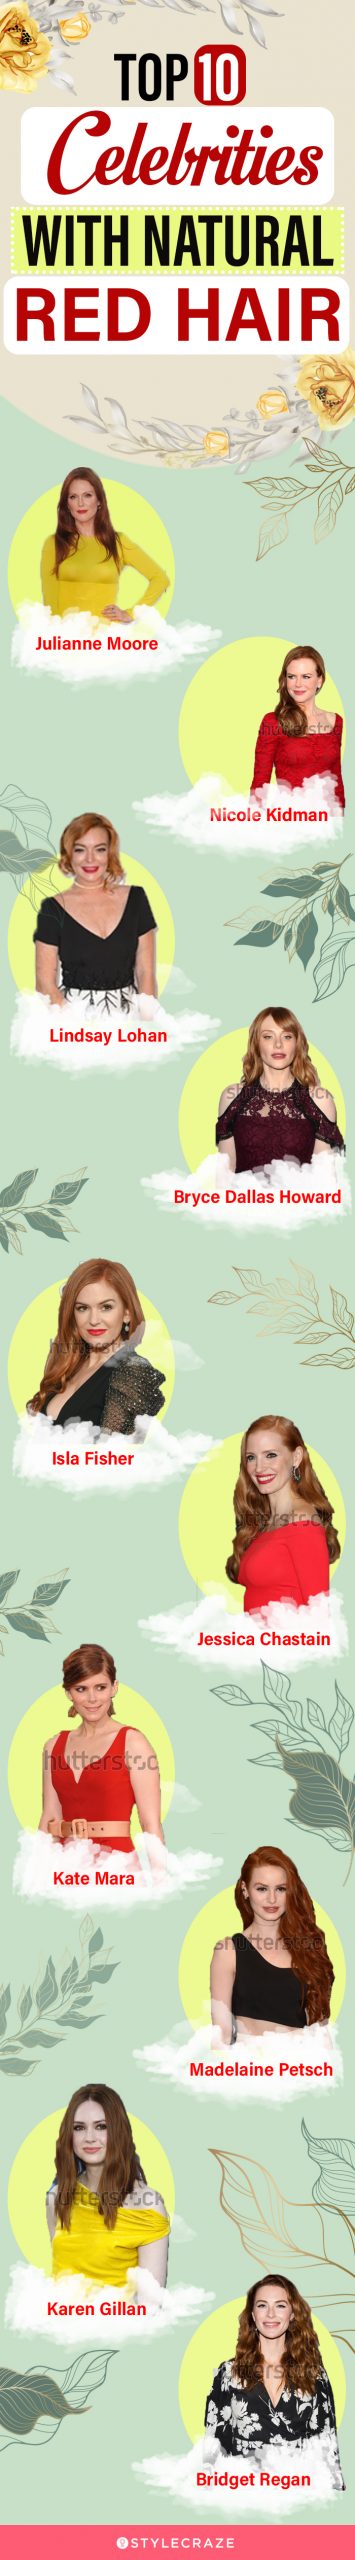 top 10 celebrities with natural red hair [infographic]